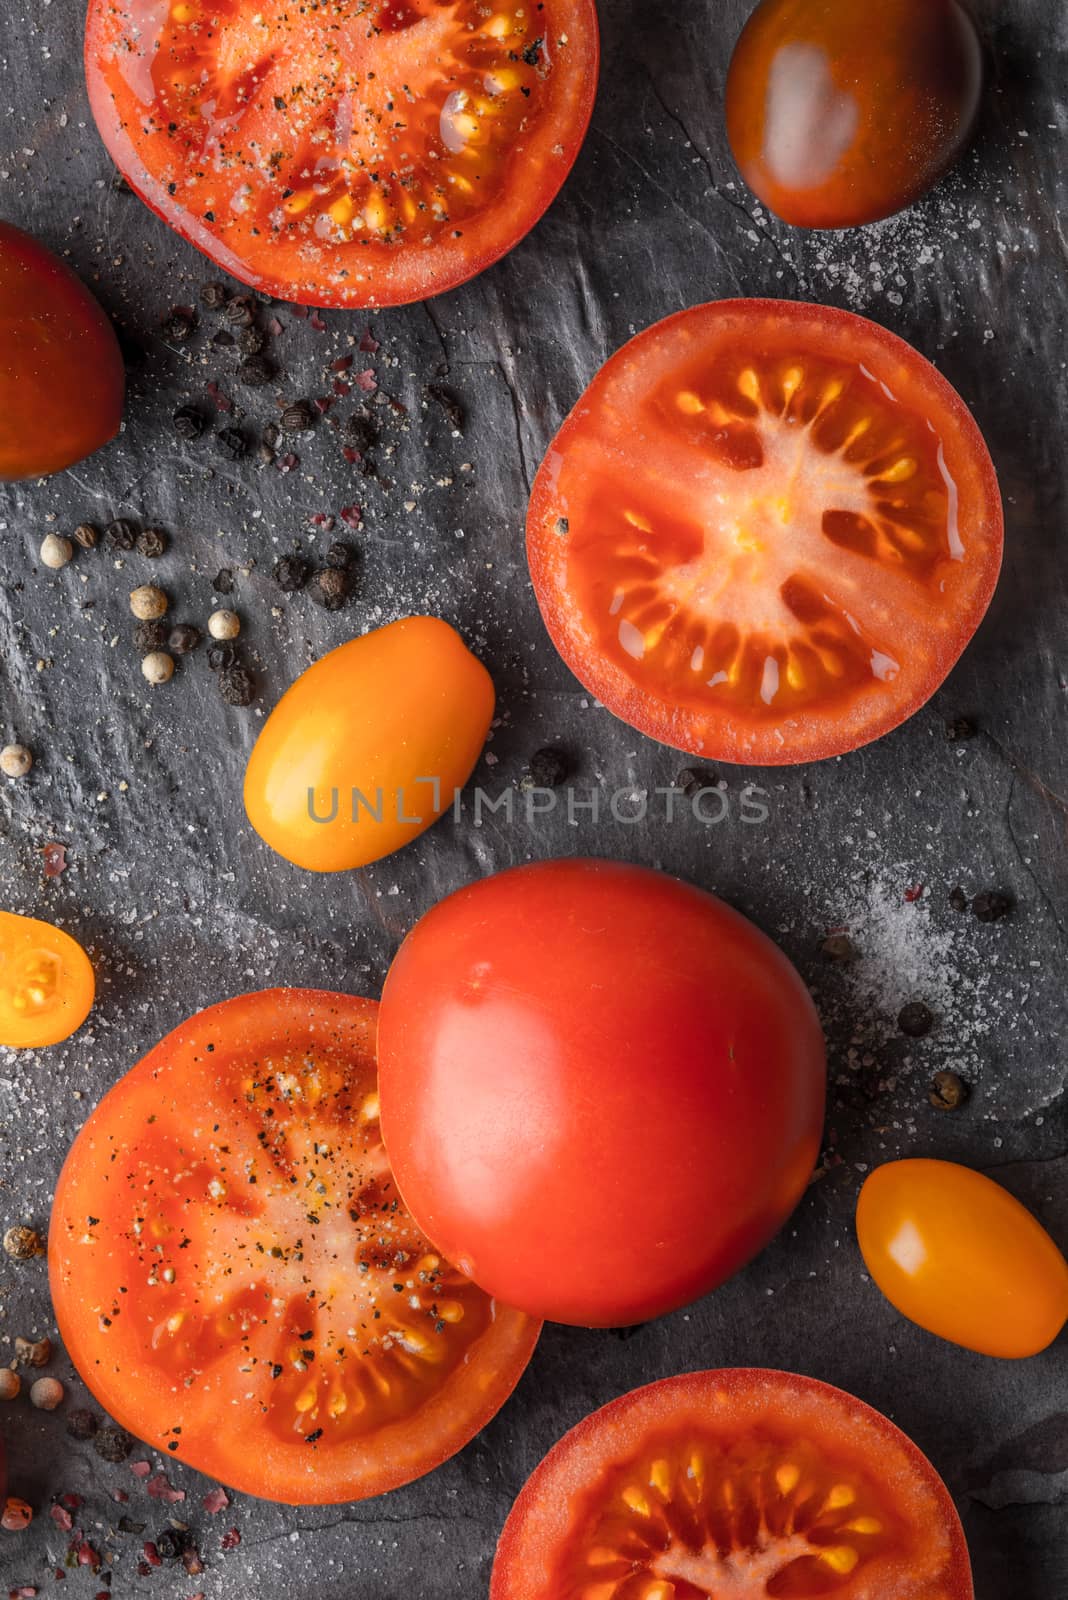 Tomatoes mix  with seasoning on the stone table vertical by Deniskarpenkov